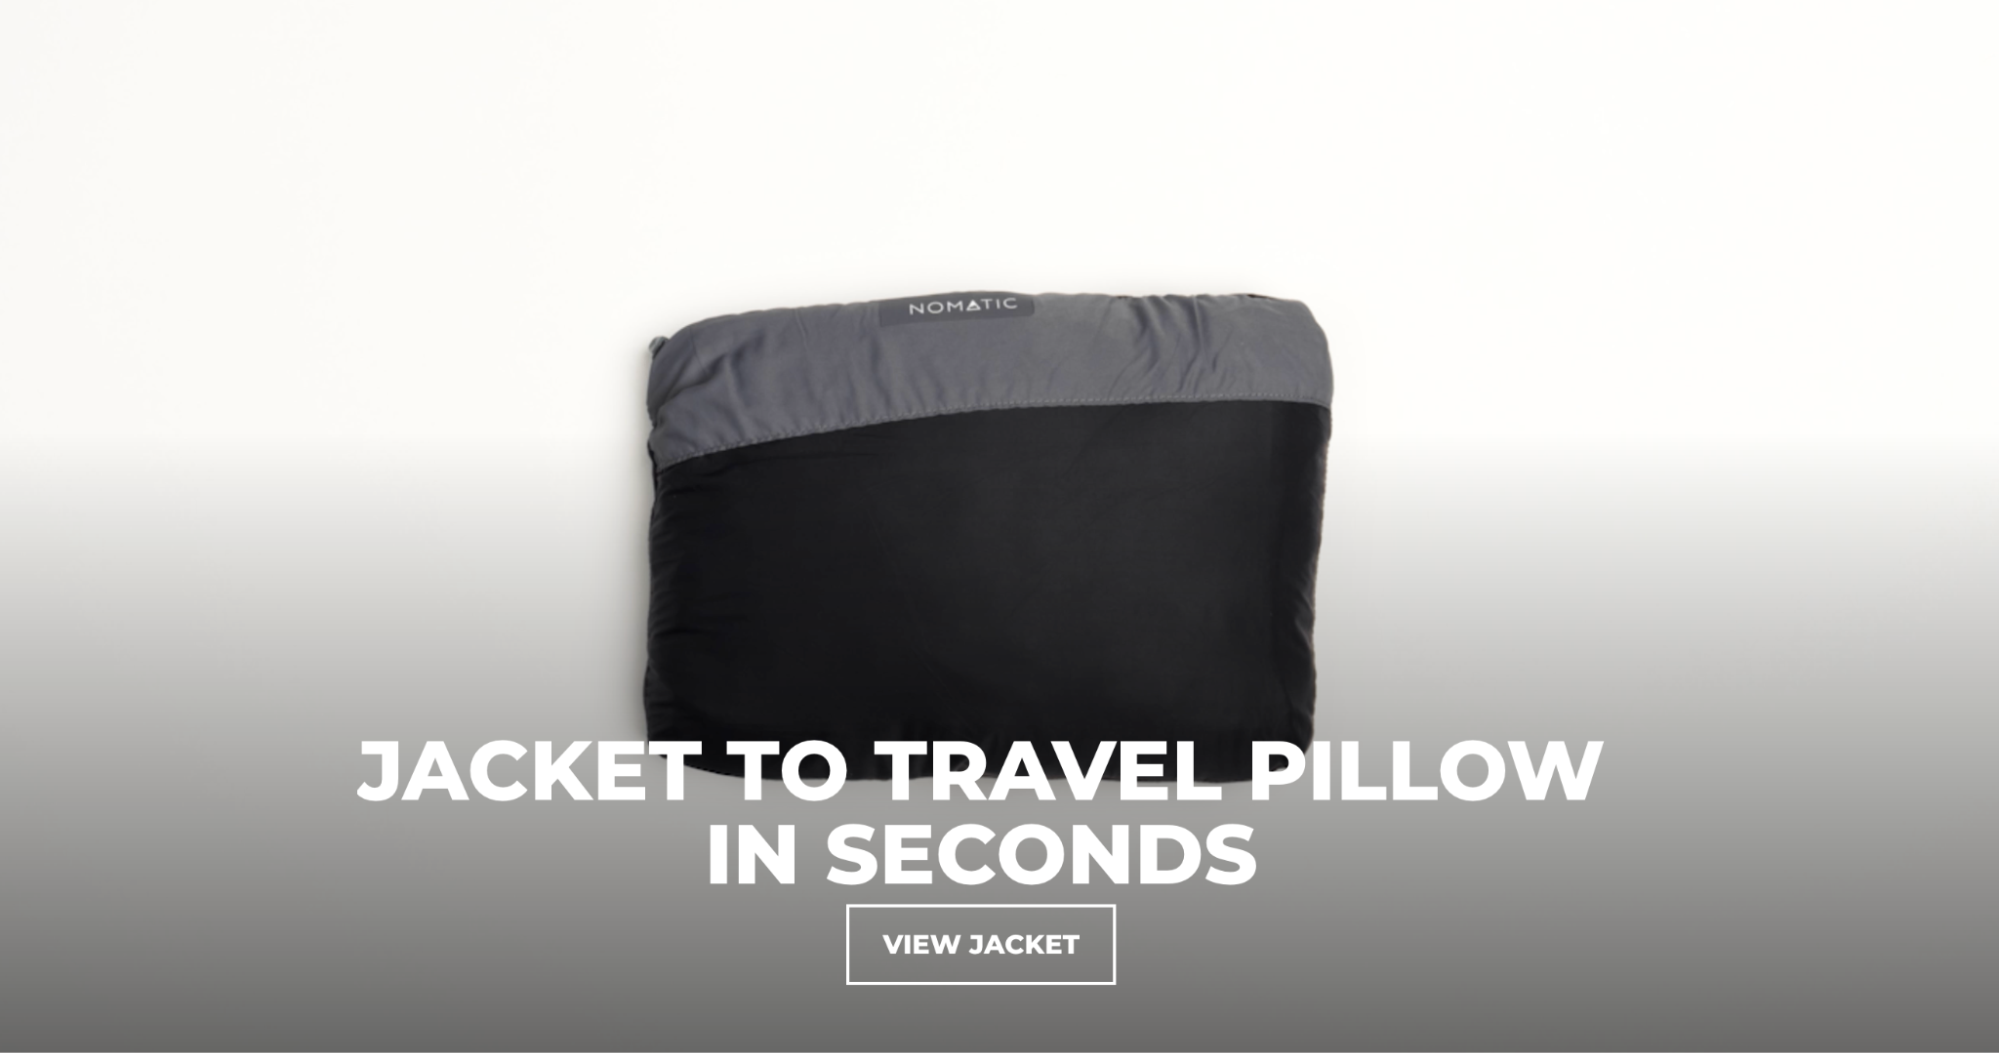 A promotional video shows how Nomatic’s jacket can be converted into a travel pillow